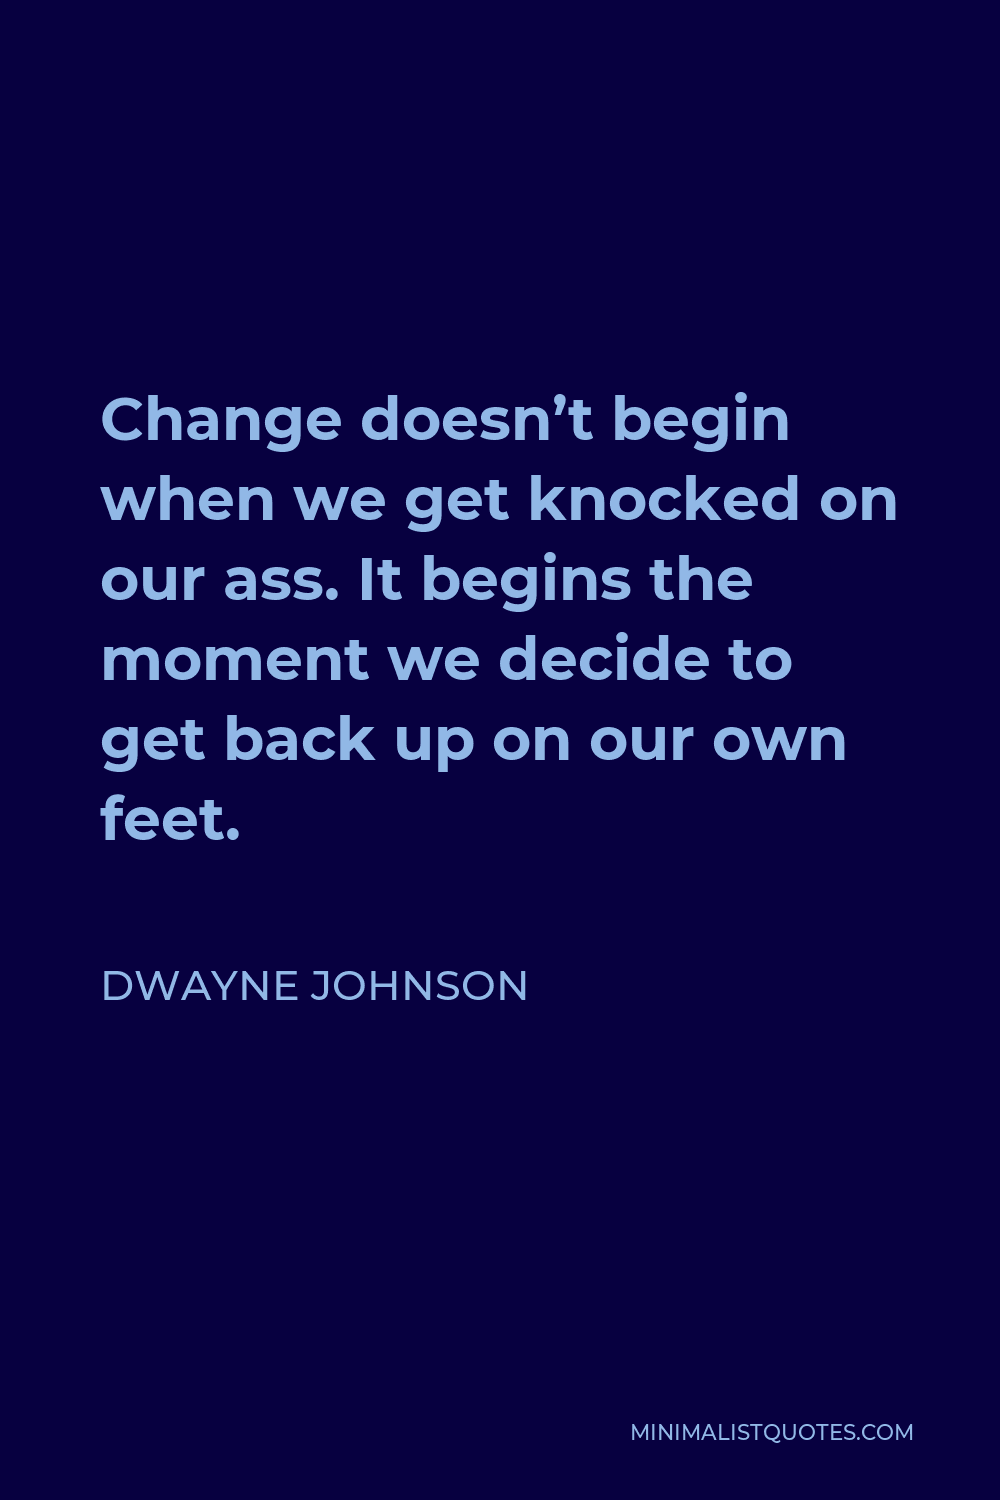 Dwayne Johnson Quote - Change doesn’t begin when we get knocked on our ass. It begins the moment we decide to get back up on our own feet.